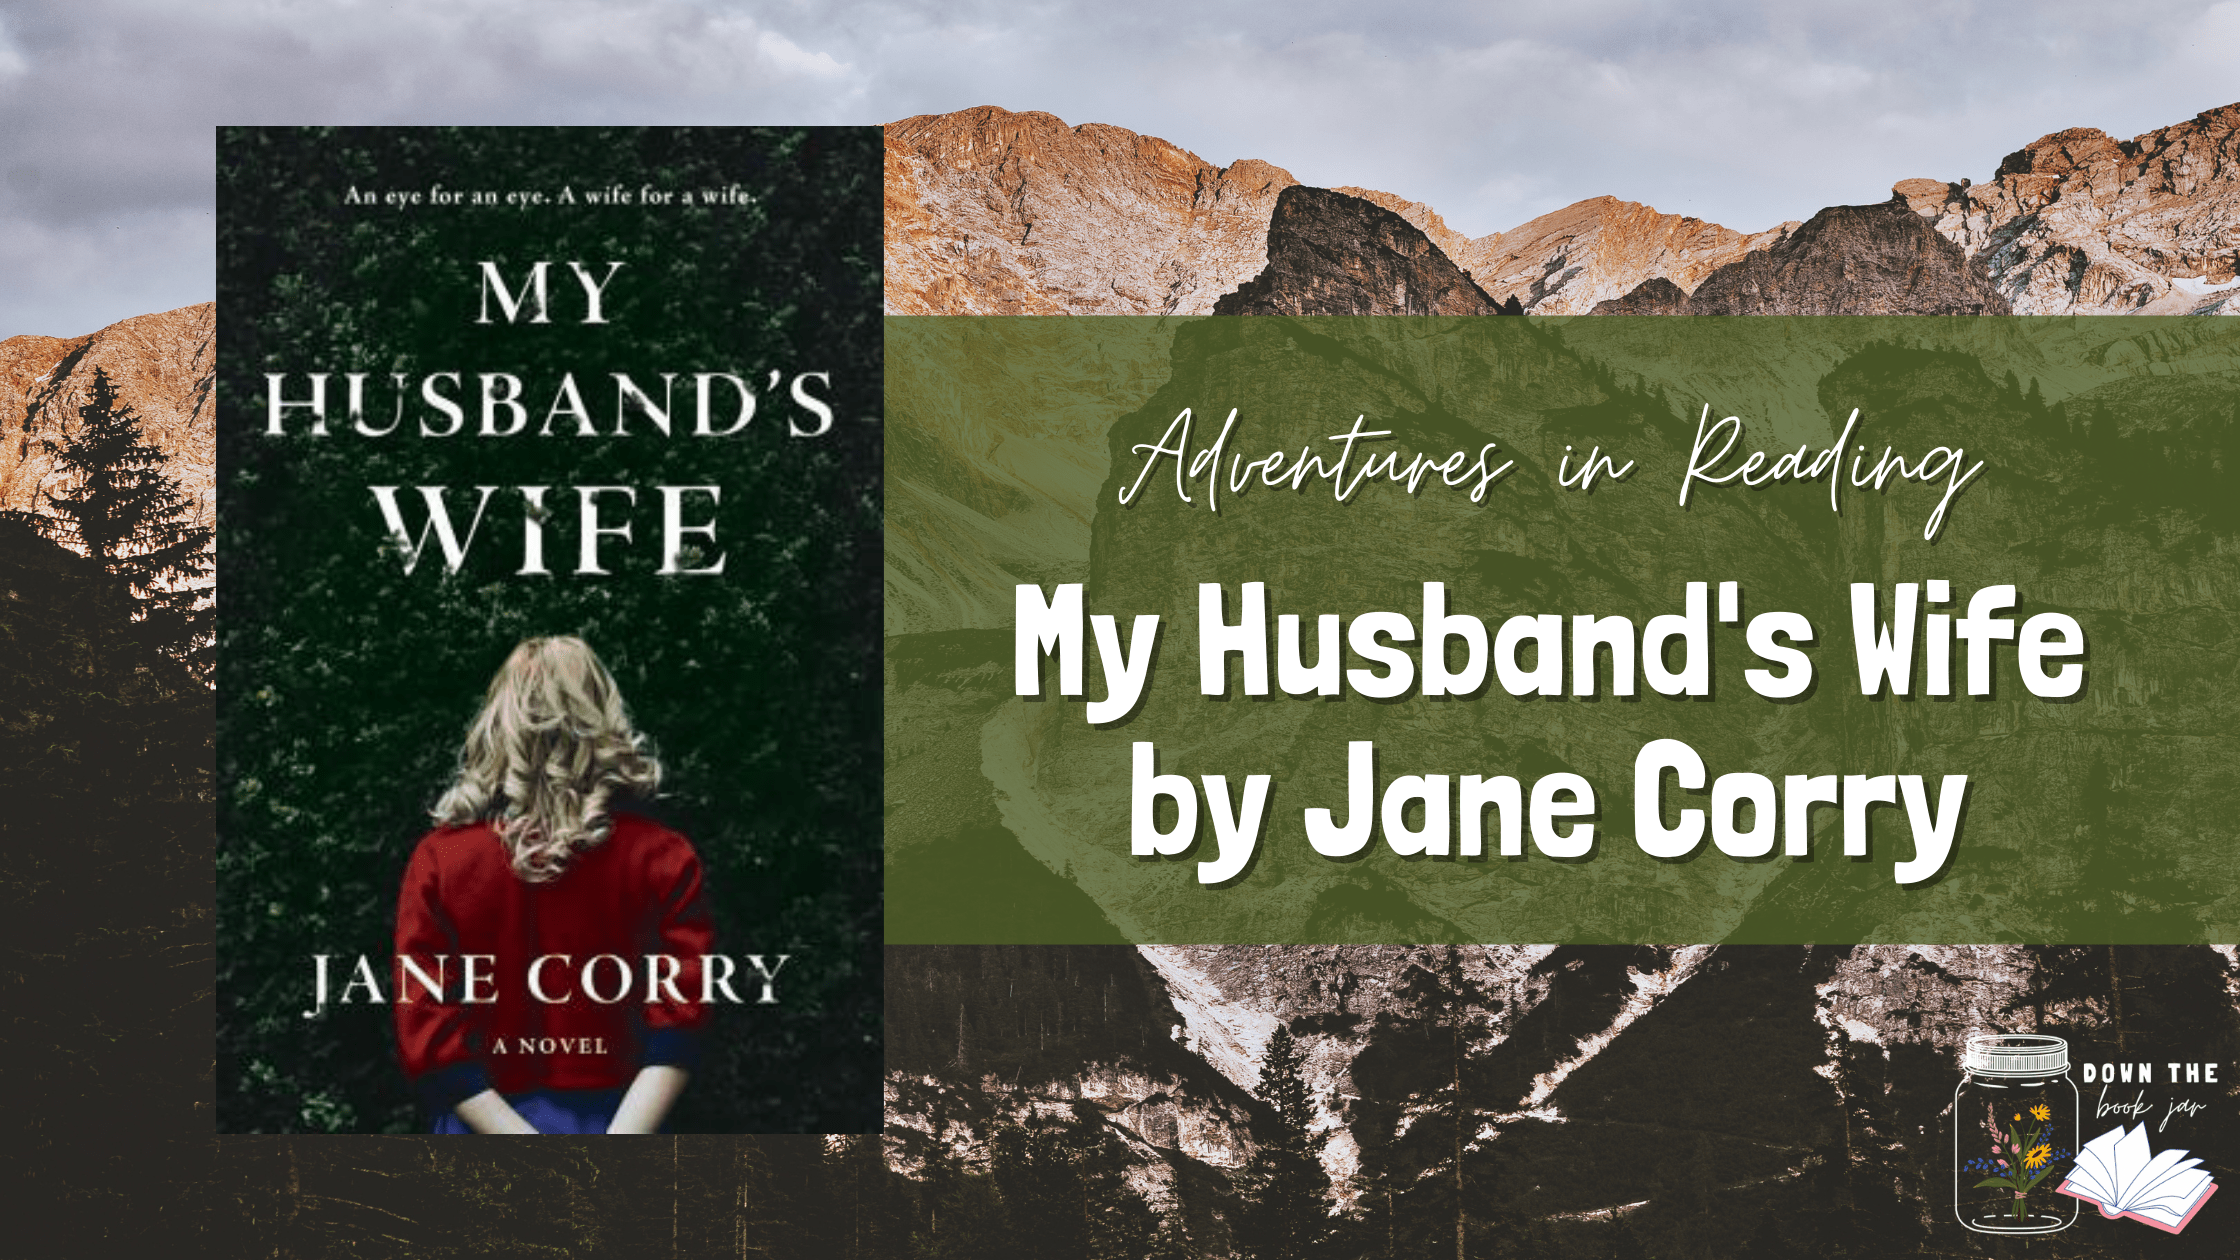 My Husband’s Wife by Jane Corry